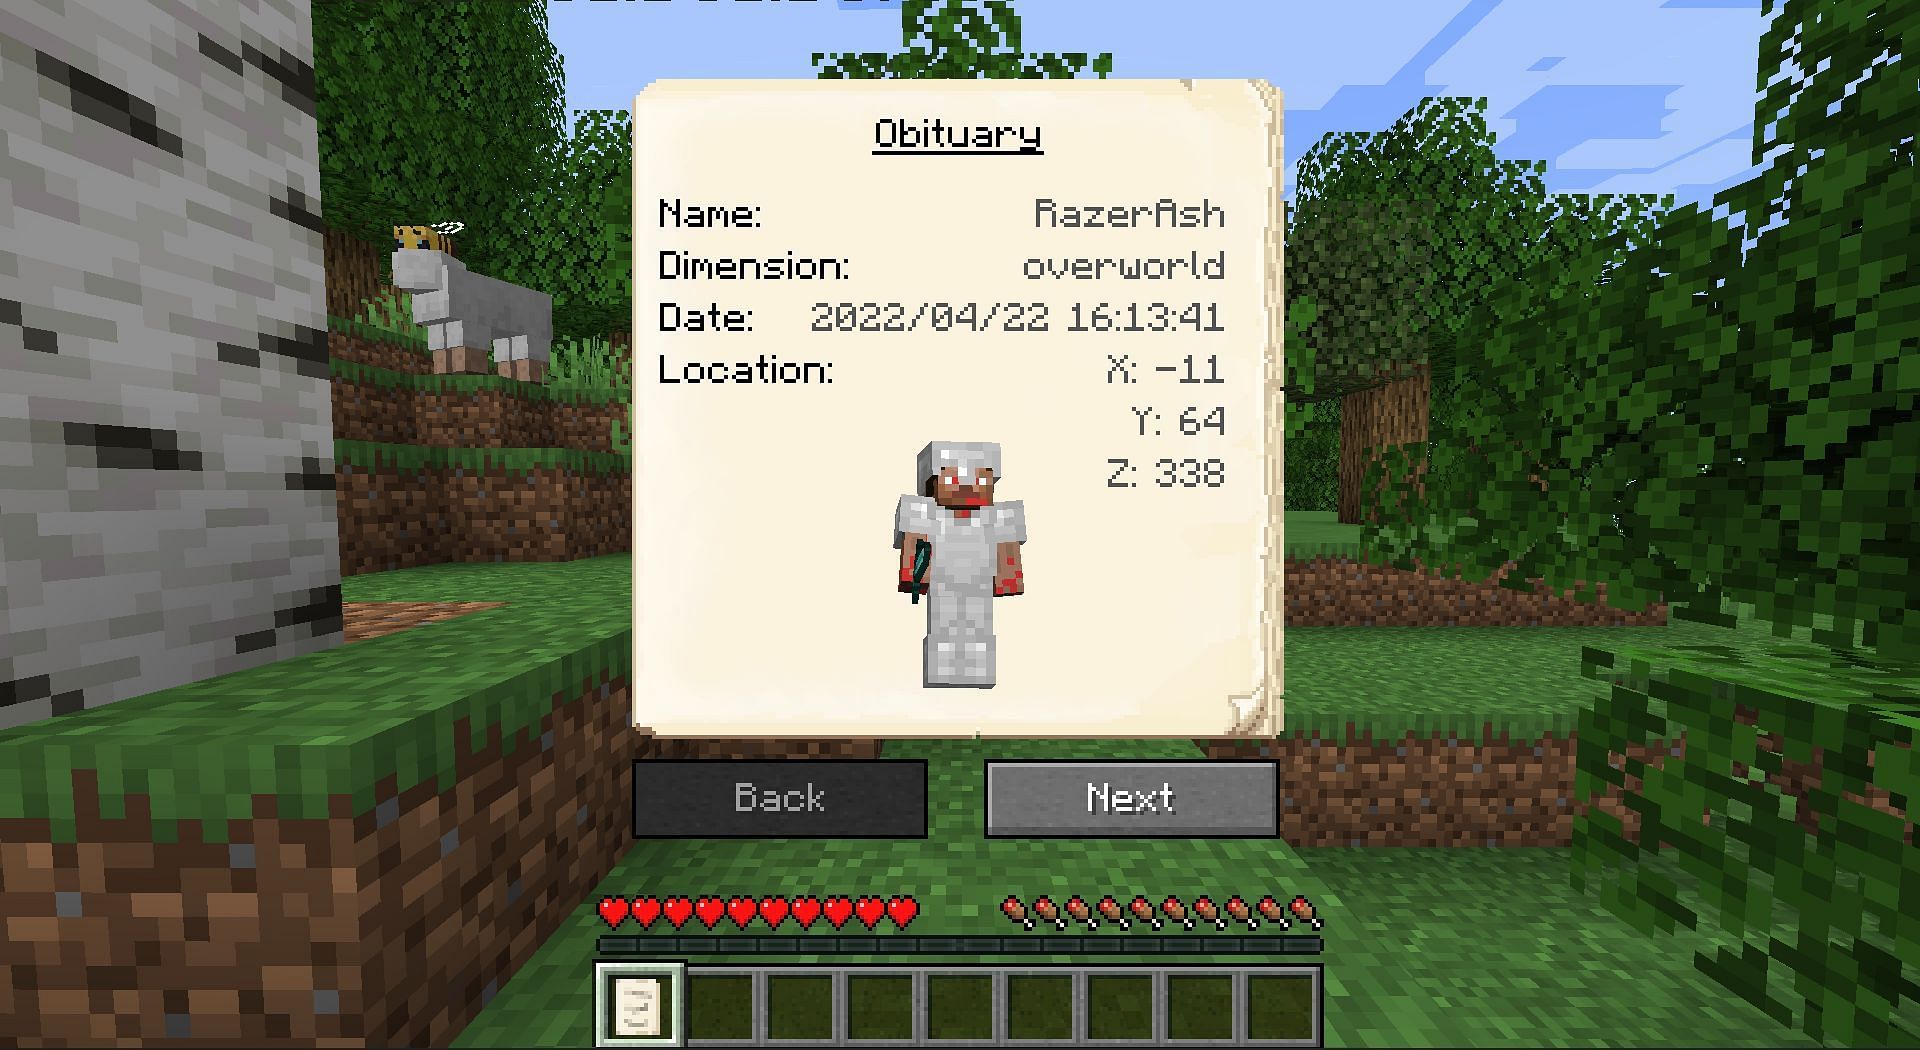 Obituary of the player with coordinates (Image via Minecraft)